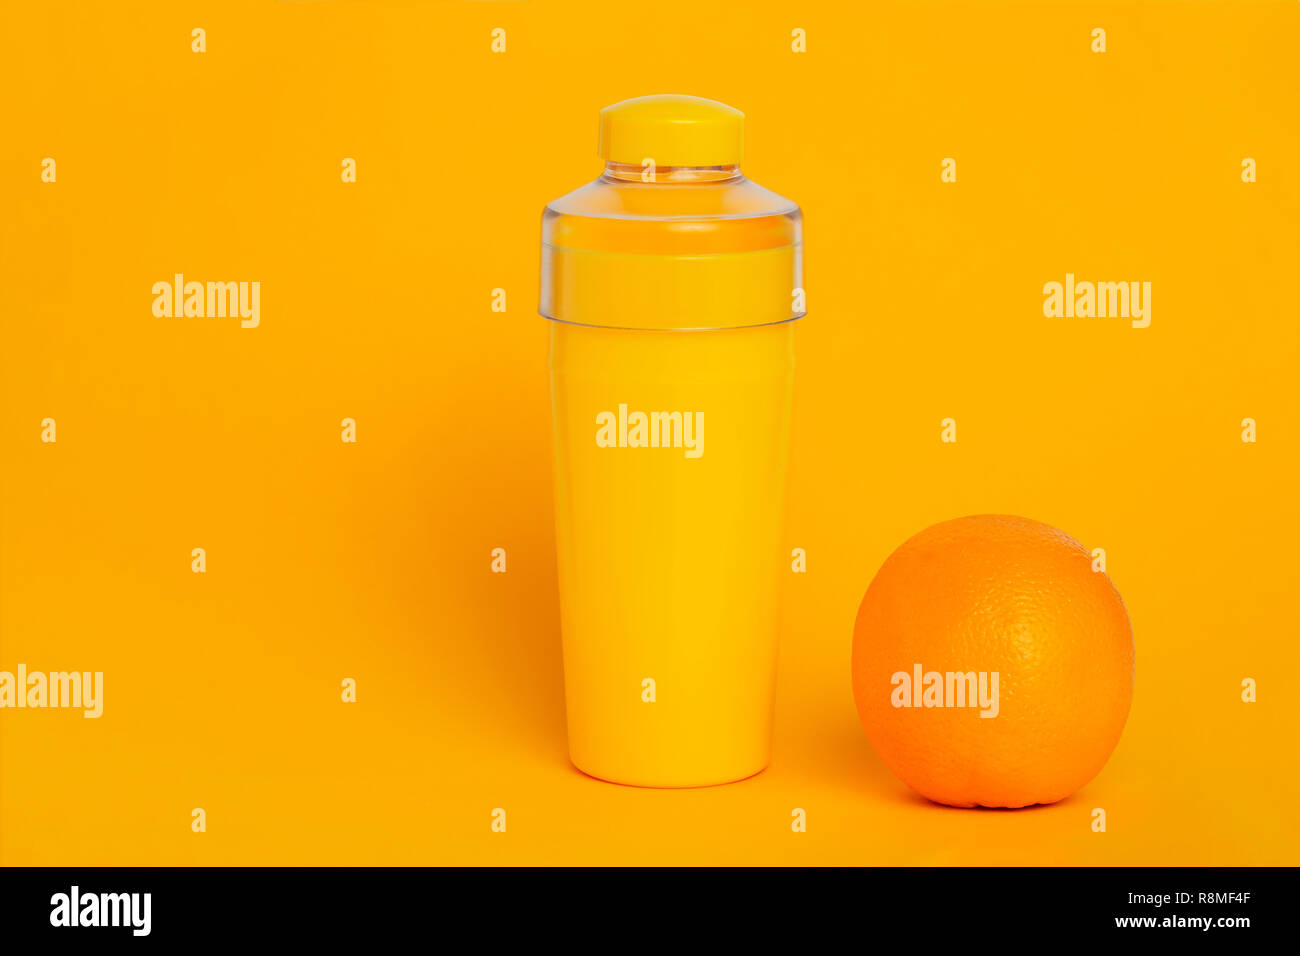 Download Yellow Bottle On A Yellow Background Next To An Orange Minimalism Stock Photo Alamy Yellowimages Mockups